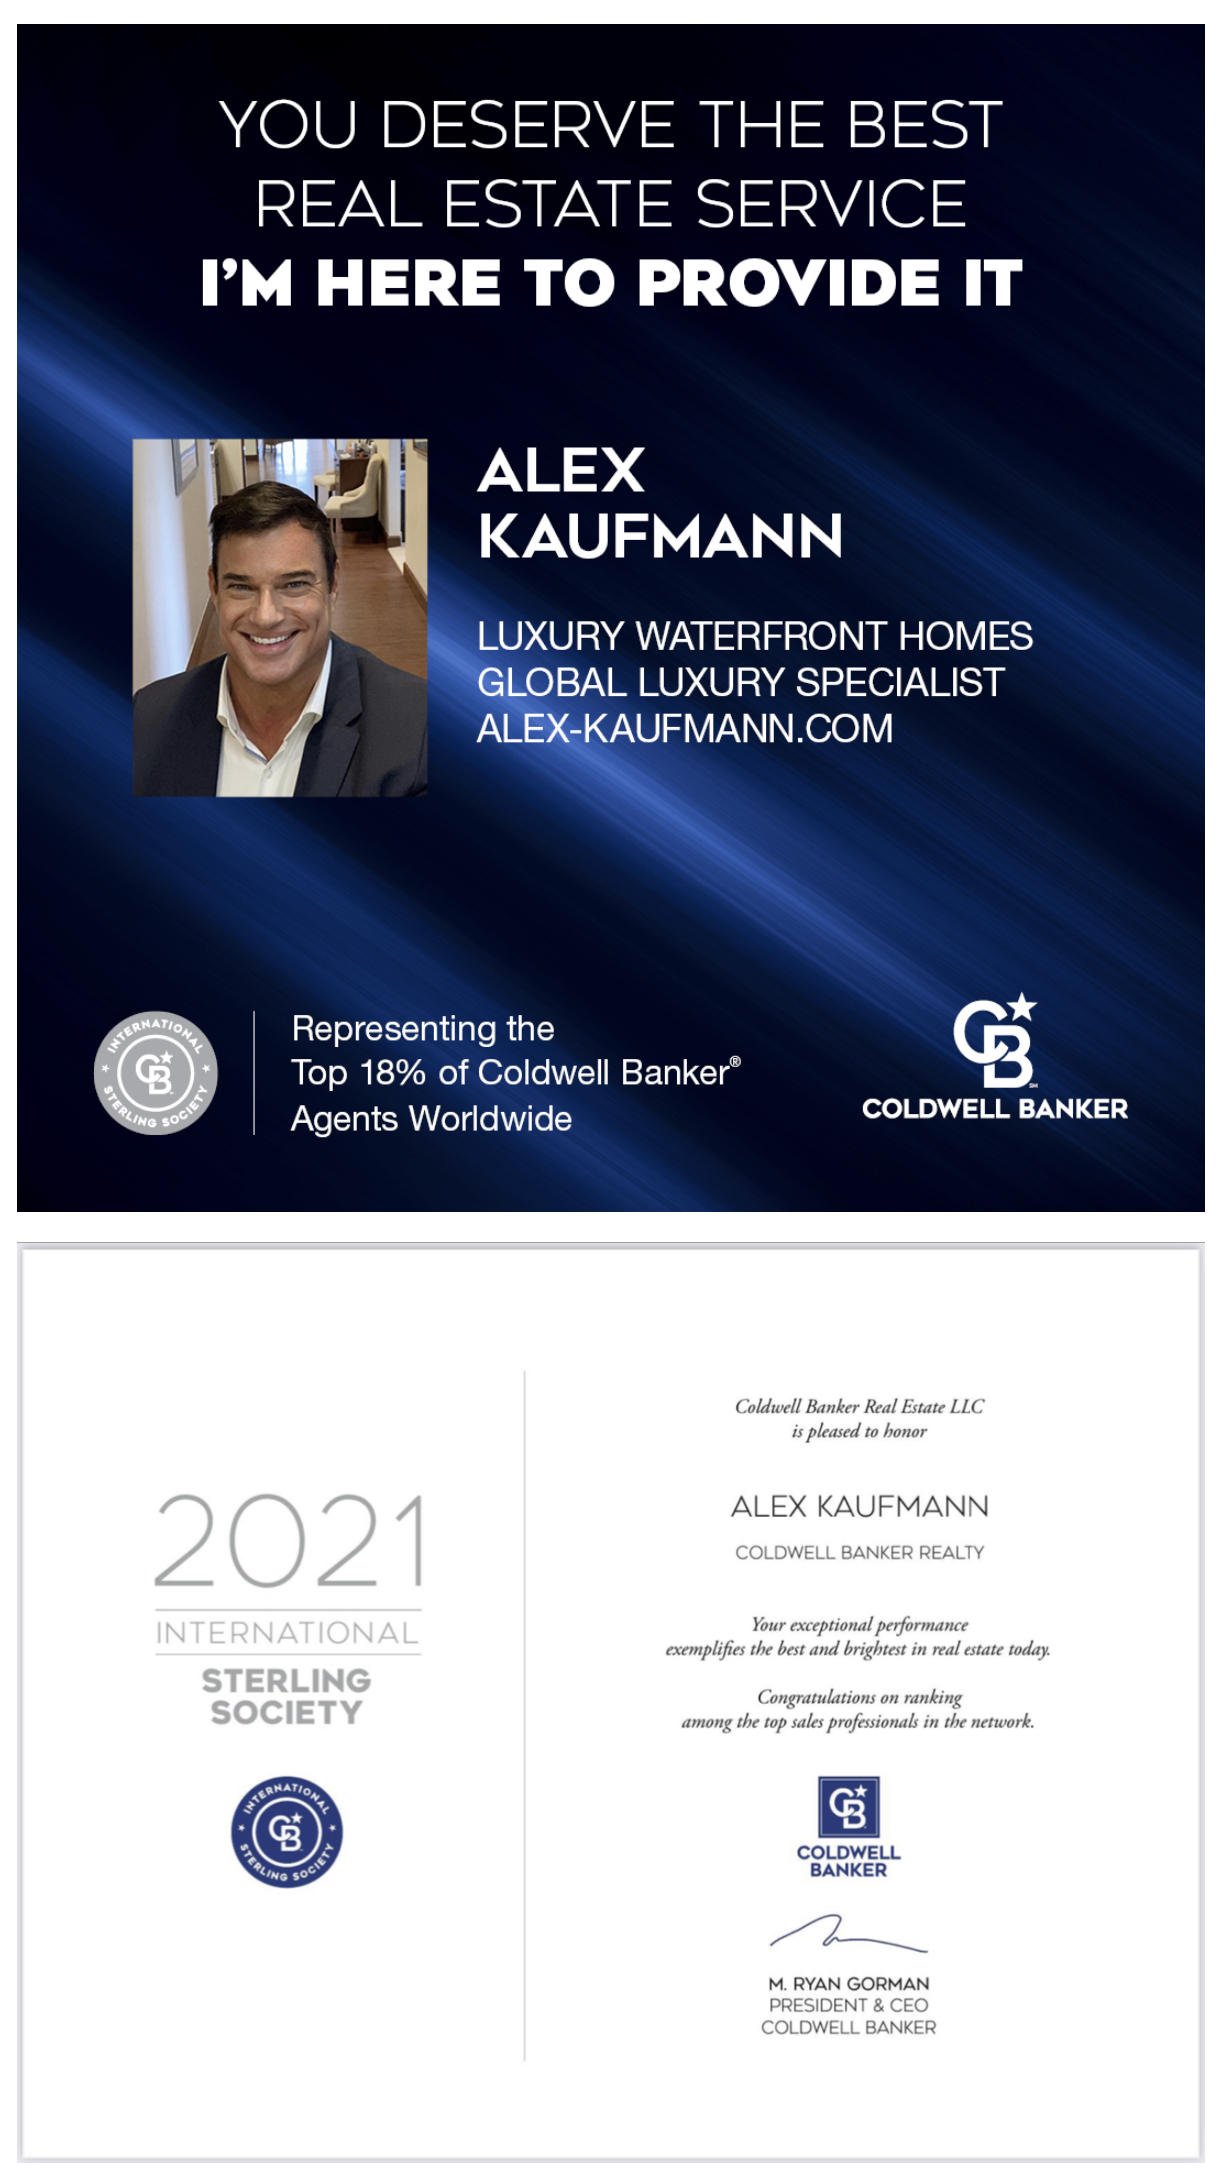 Top 18% Coldwell Banker Global Luxury